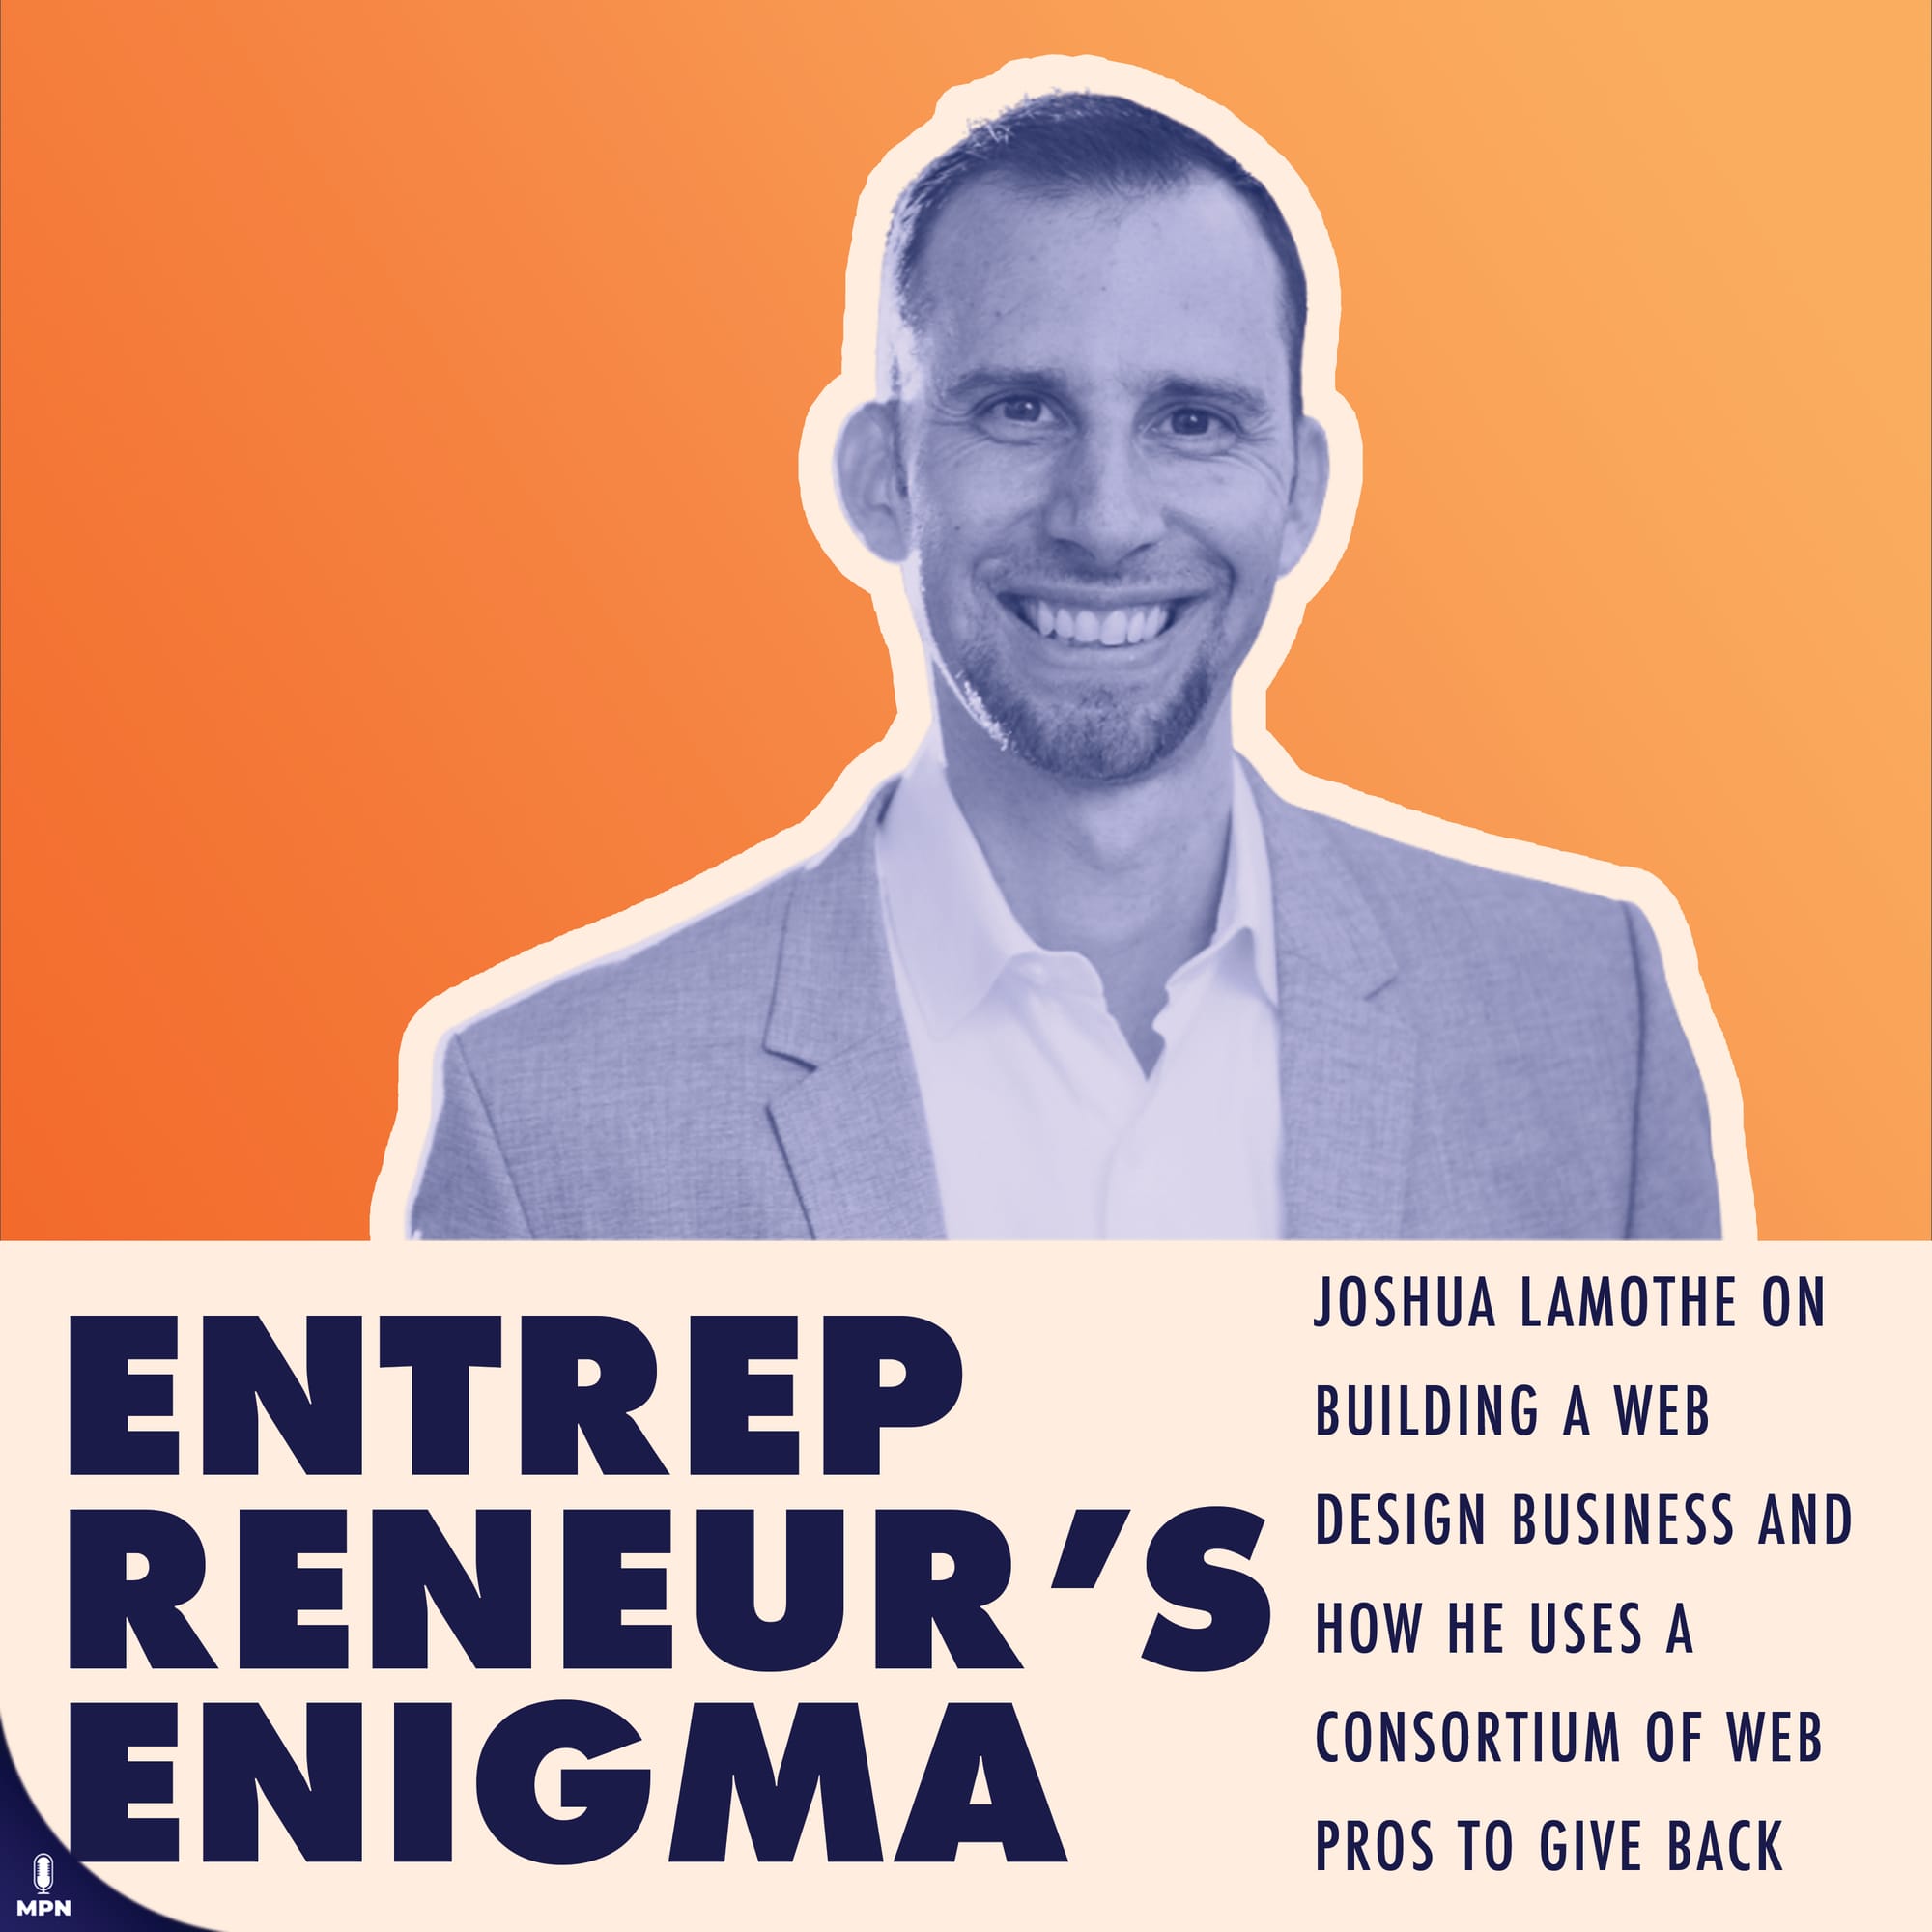 Entrepreneur's Enigma album art with a picture of Joshua Lamothe. Says Joshua Lamothe on Building A Web Design Business And How He Uses His Consortium Of Web Pros To Give Back.